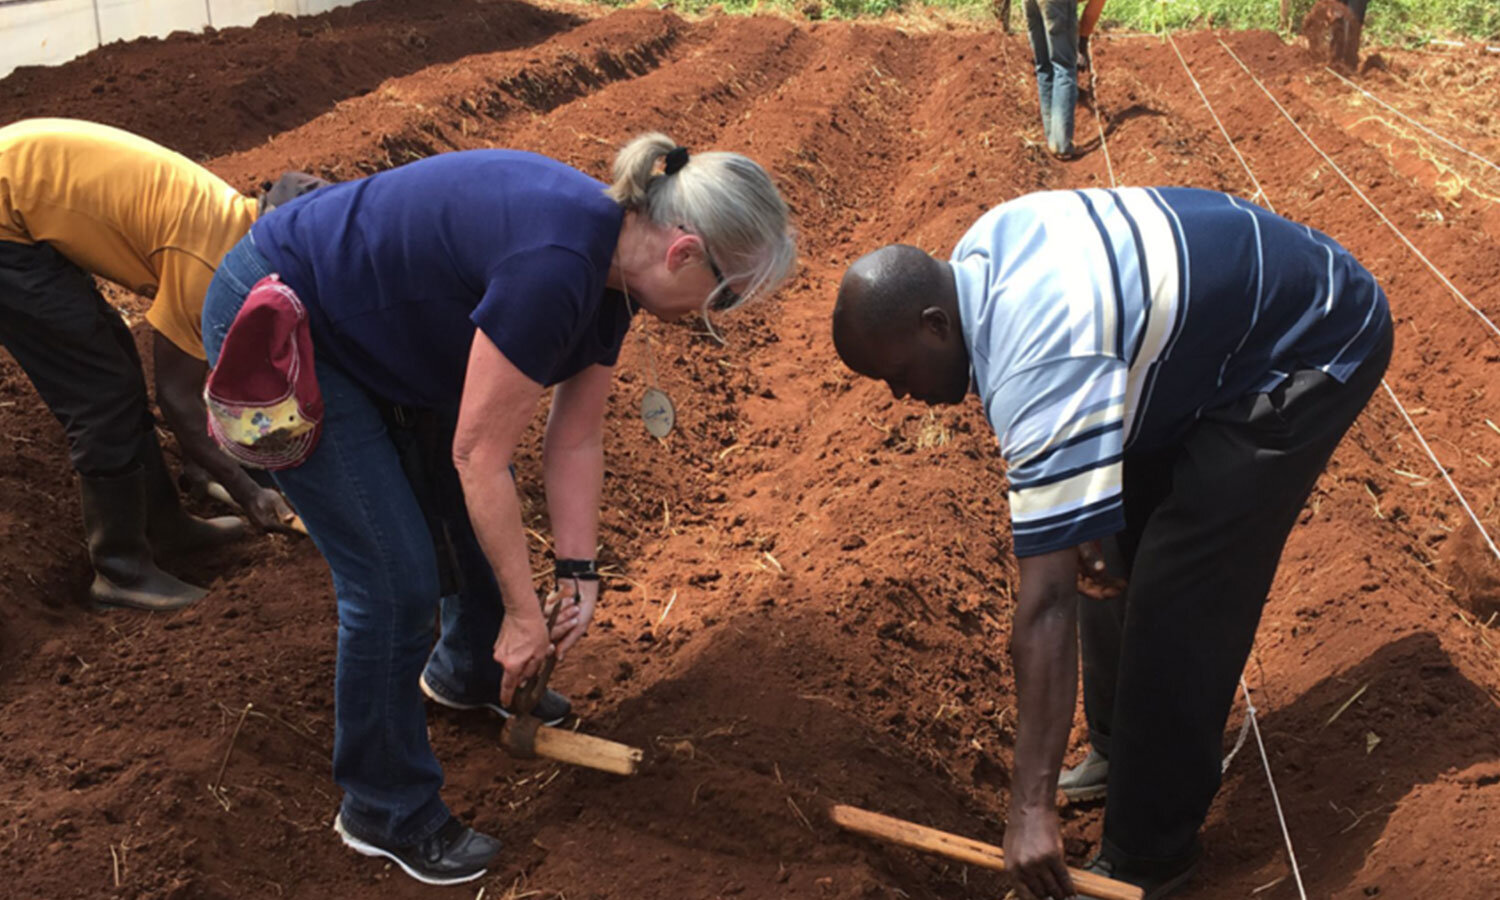   The Giving Exchange sowed seeds for a new garden. This garden will provide fresh produce to children in the community.  